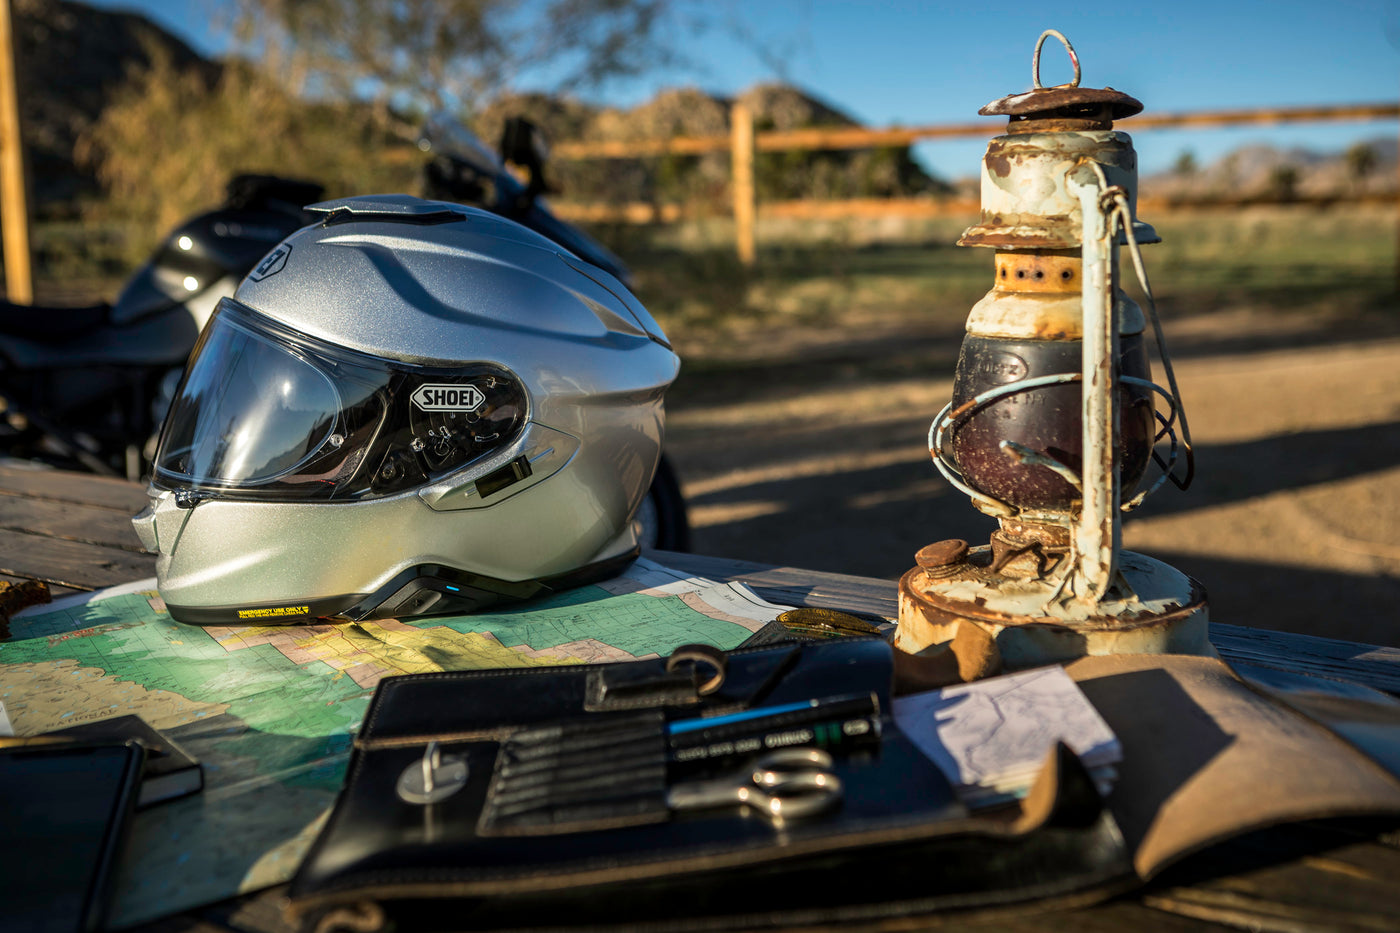 Motorcycle Helmets: What is a proper fit?